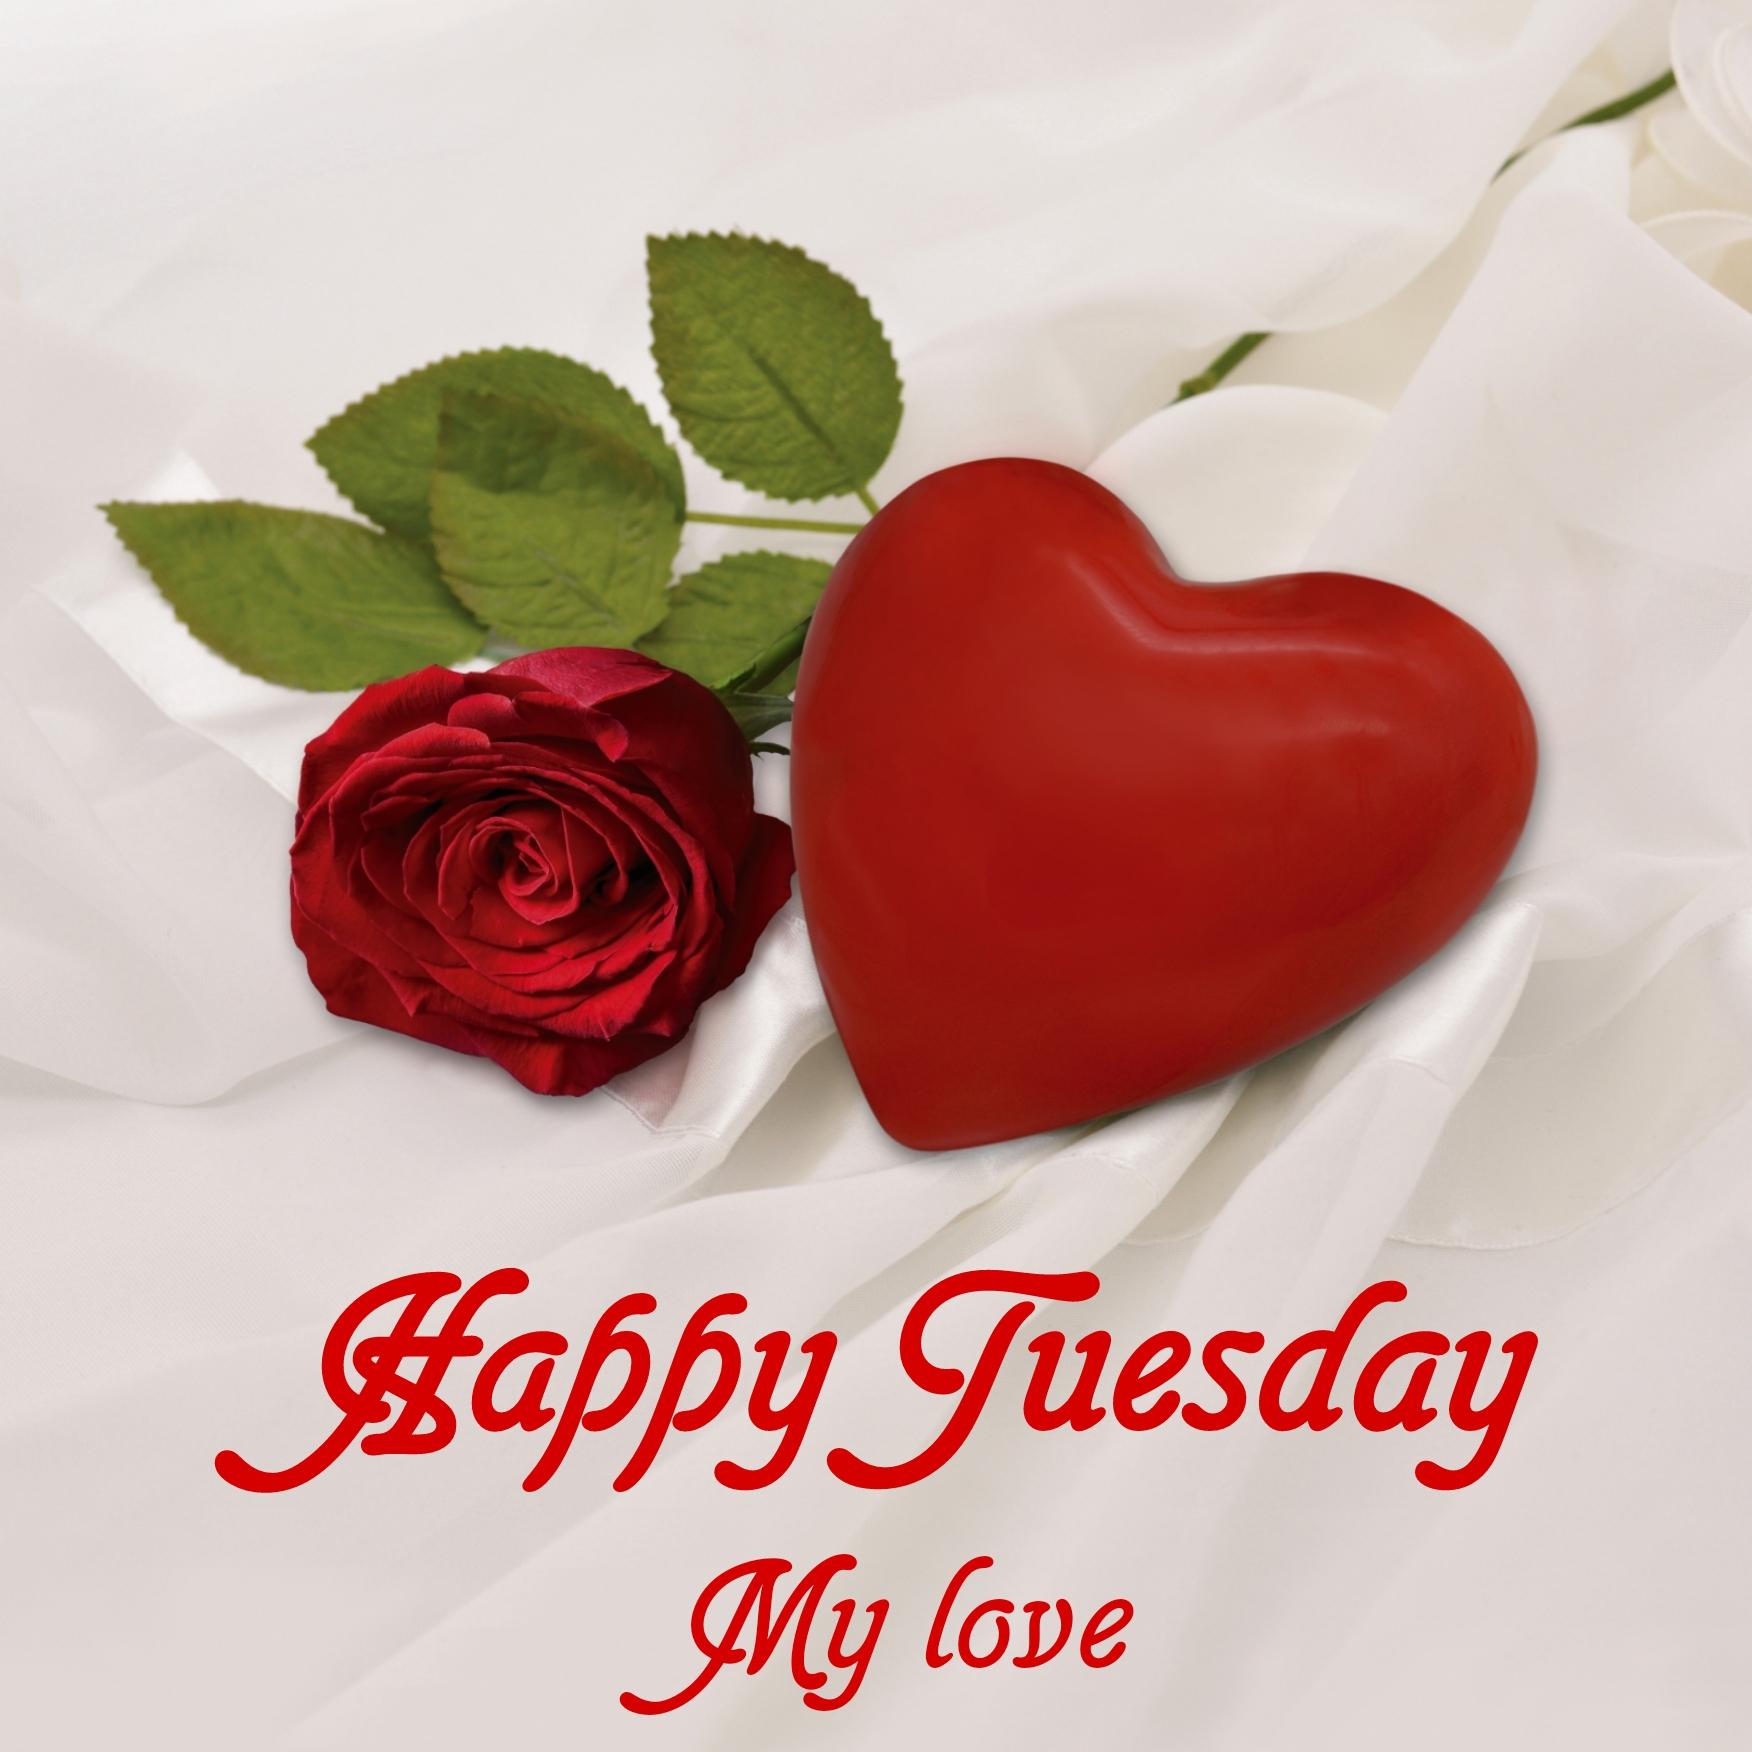 Happy Tuesday My Love Images for Wife